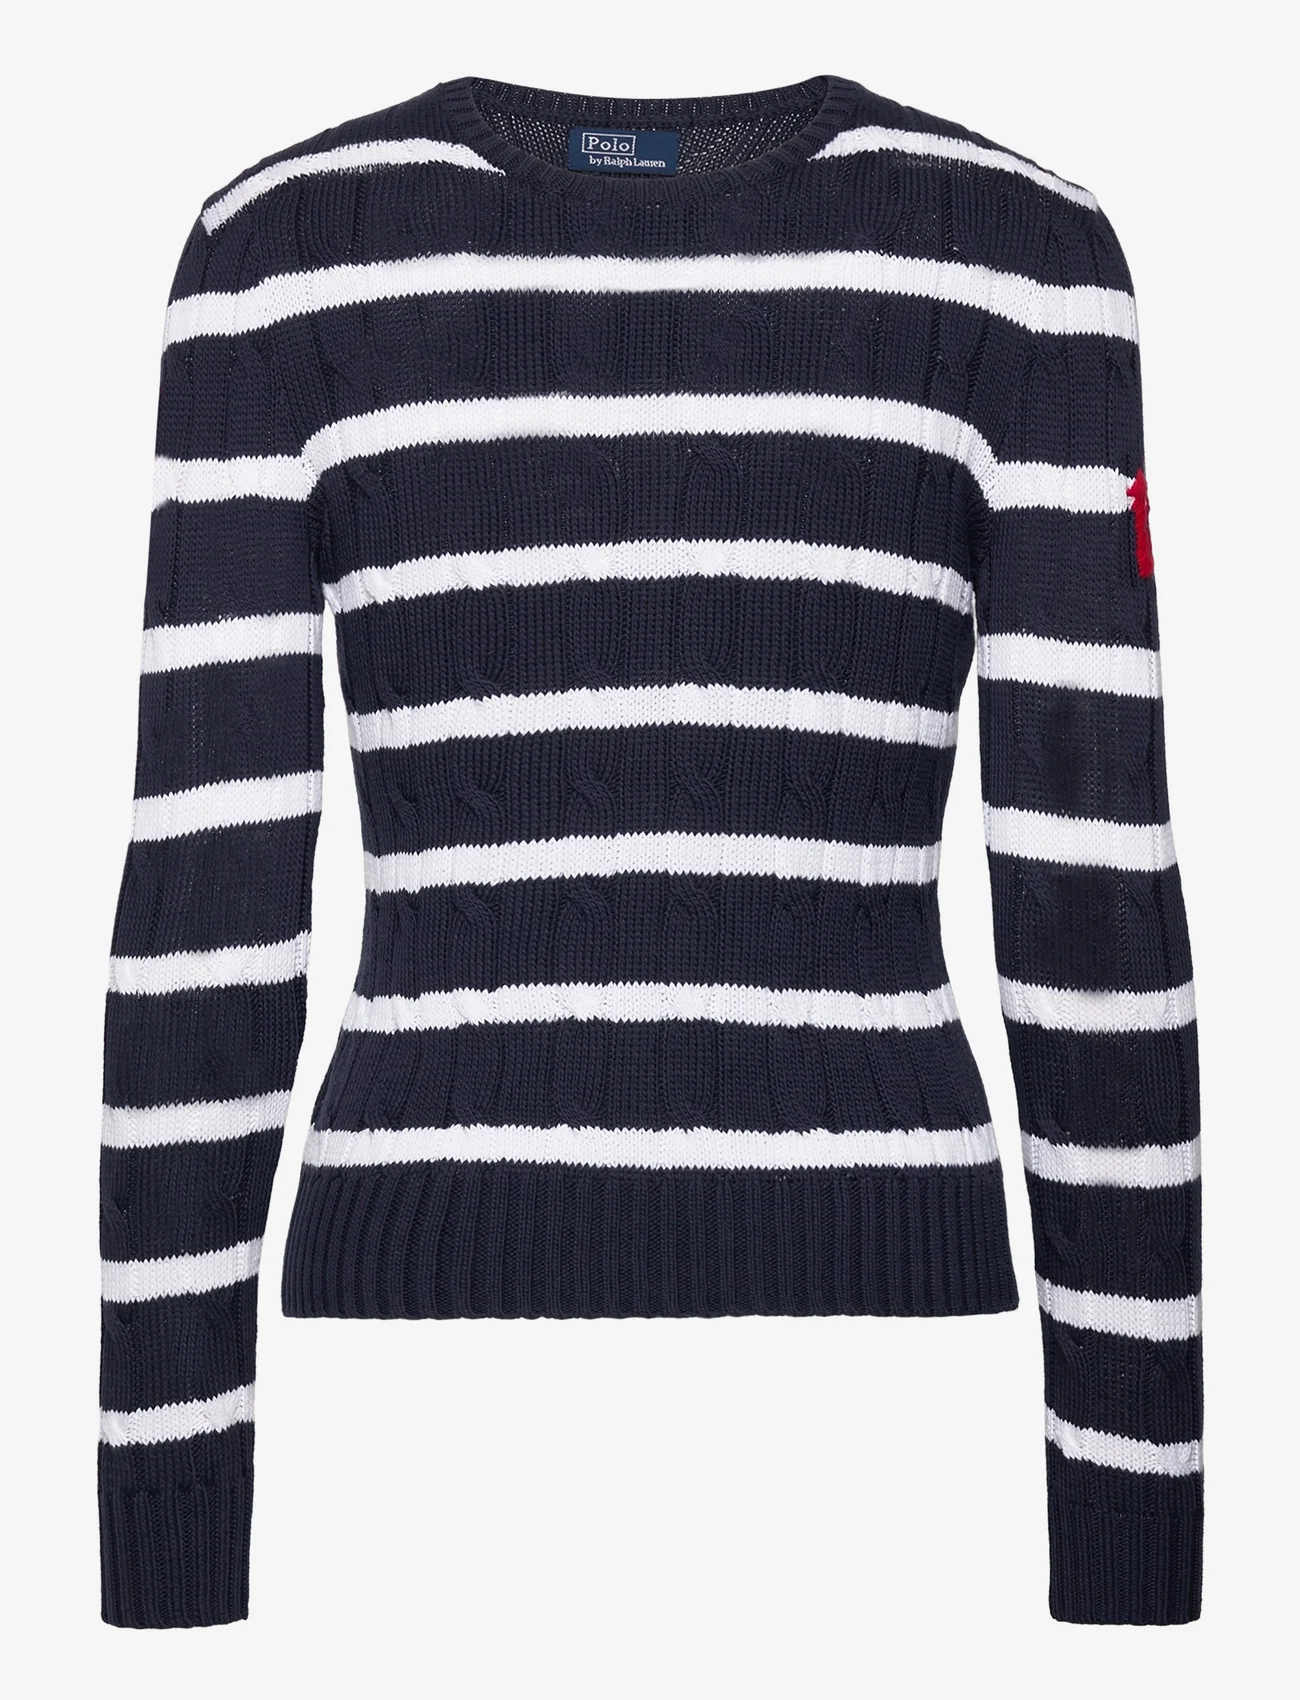 Polo Ralph Lauren - Anchor-Motif Cable Cotton Sweater - neulepuserot - hunter navy/white - 0